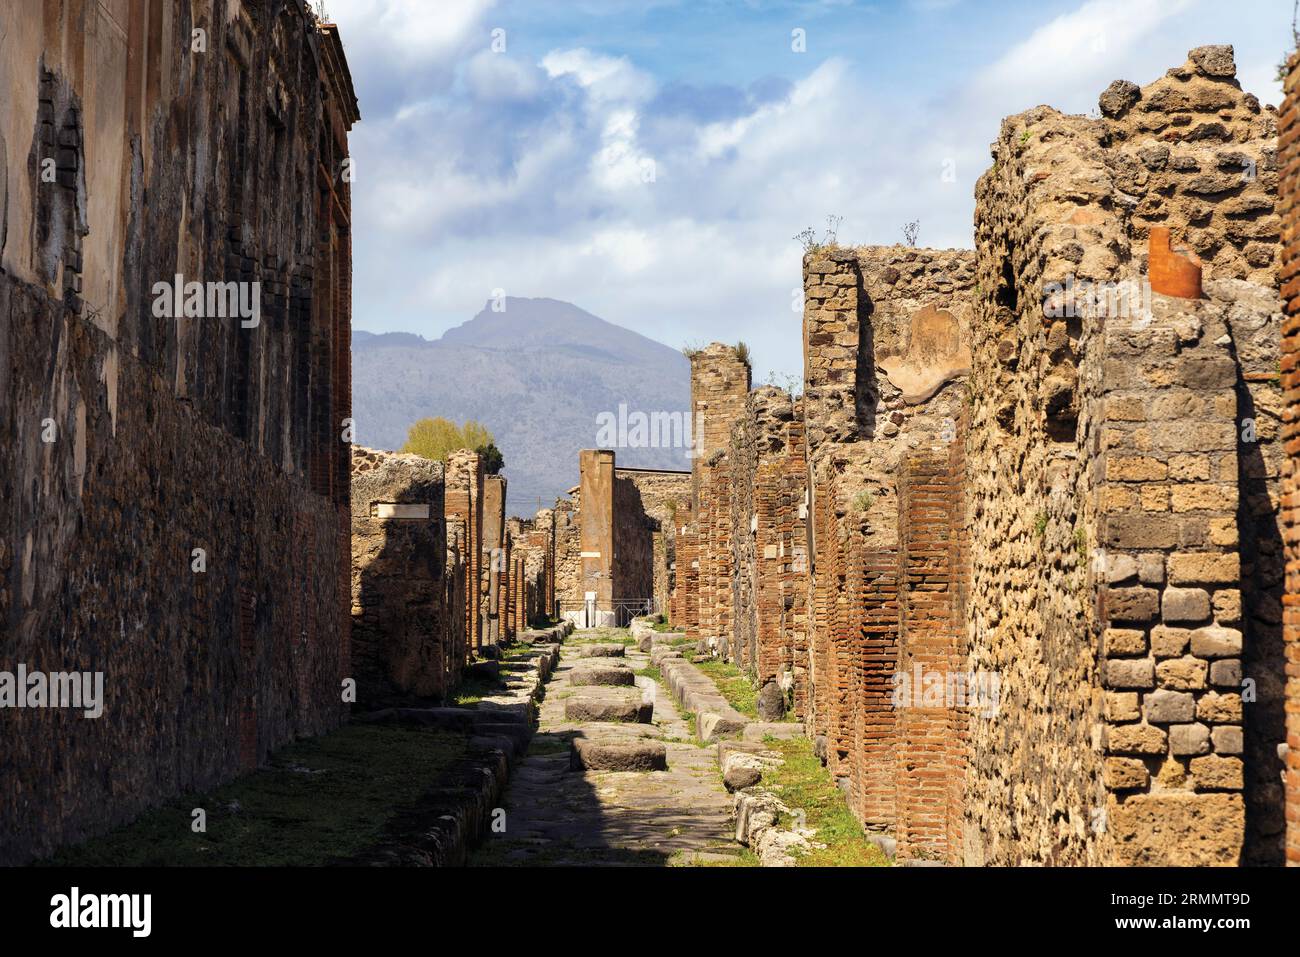 Pompeii Archaeological Site, Campania, Italy.  Excavated street with stepping stones.  Pompeii, Herculaneum, and Torre Annunziata are collectively des Stock Photo